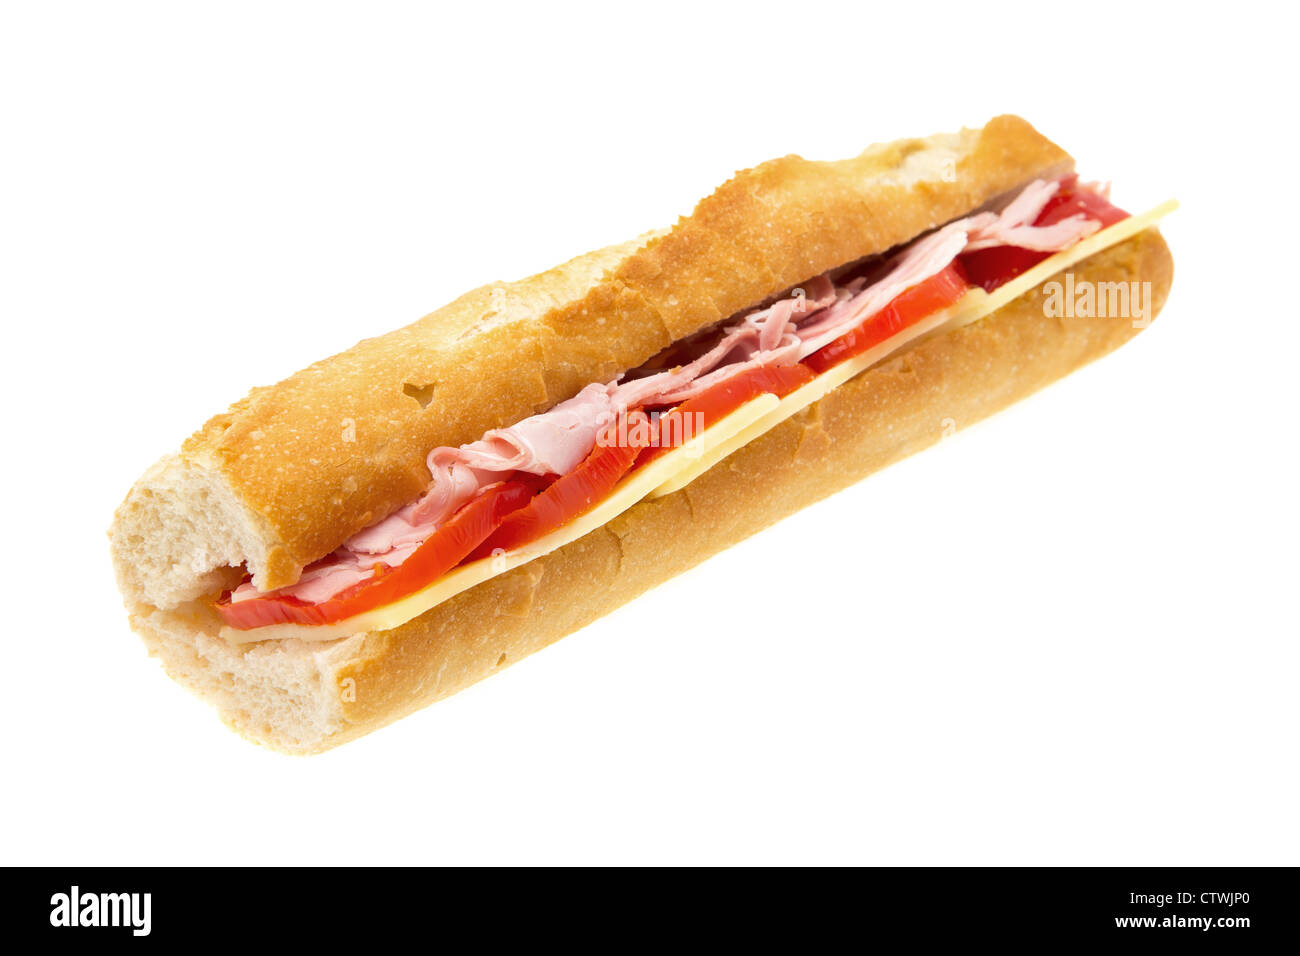 Baguette sandwich containing ham, cheese and tomato - studio shot with a shallow depth of field and white background Stock Photo